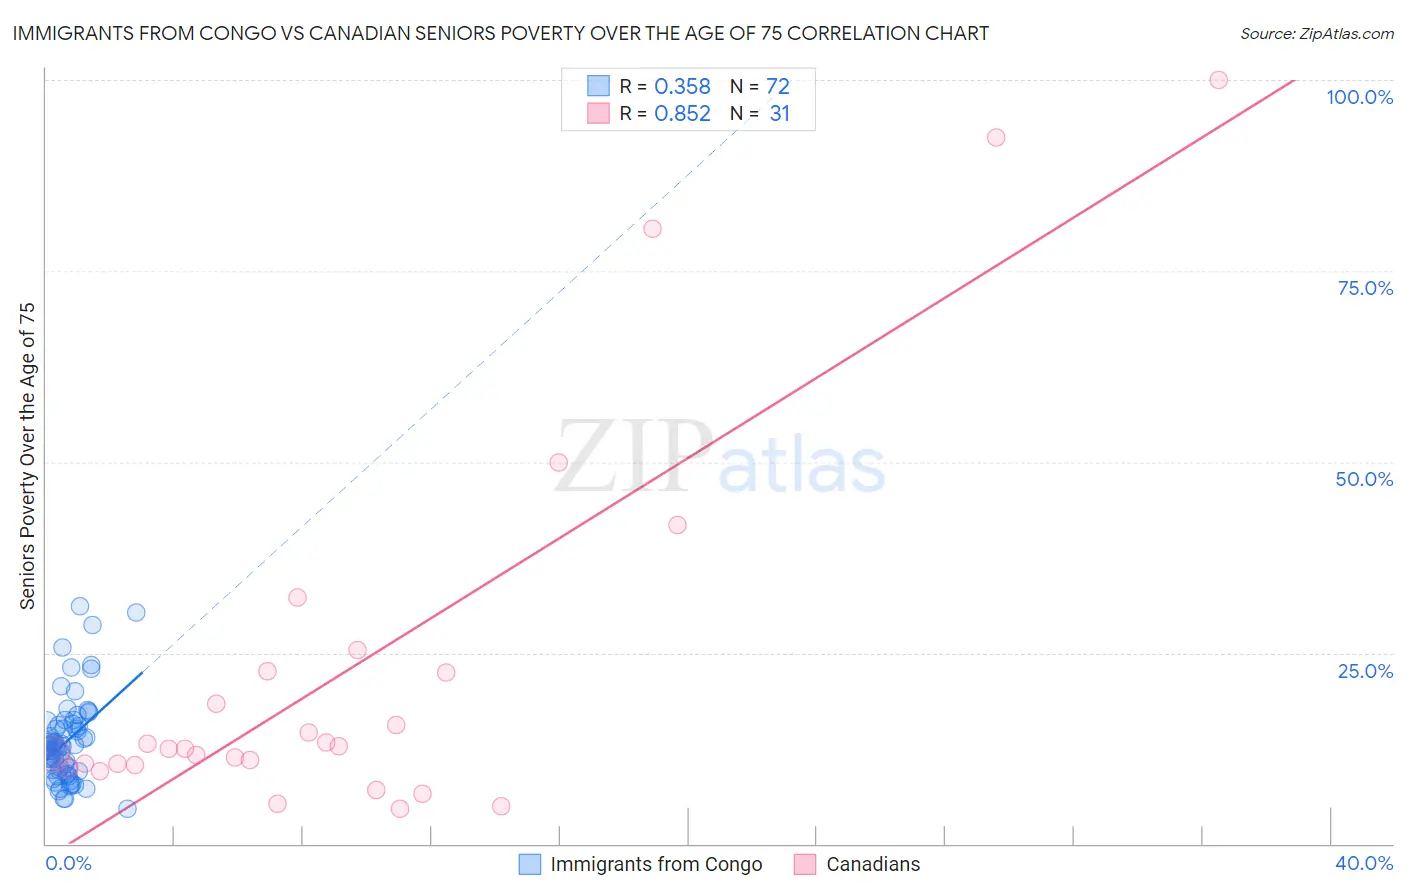 Immigrants from Congo vs Canadian Seniors Poverty Over the Age of 75